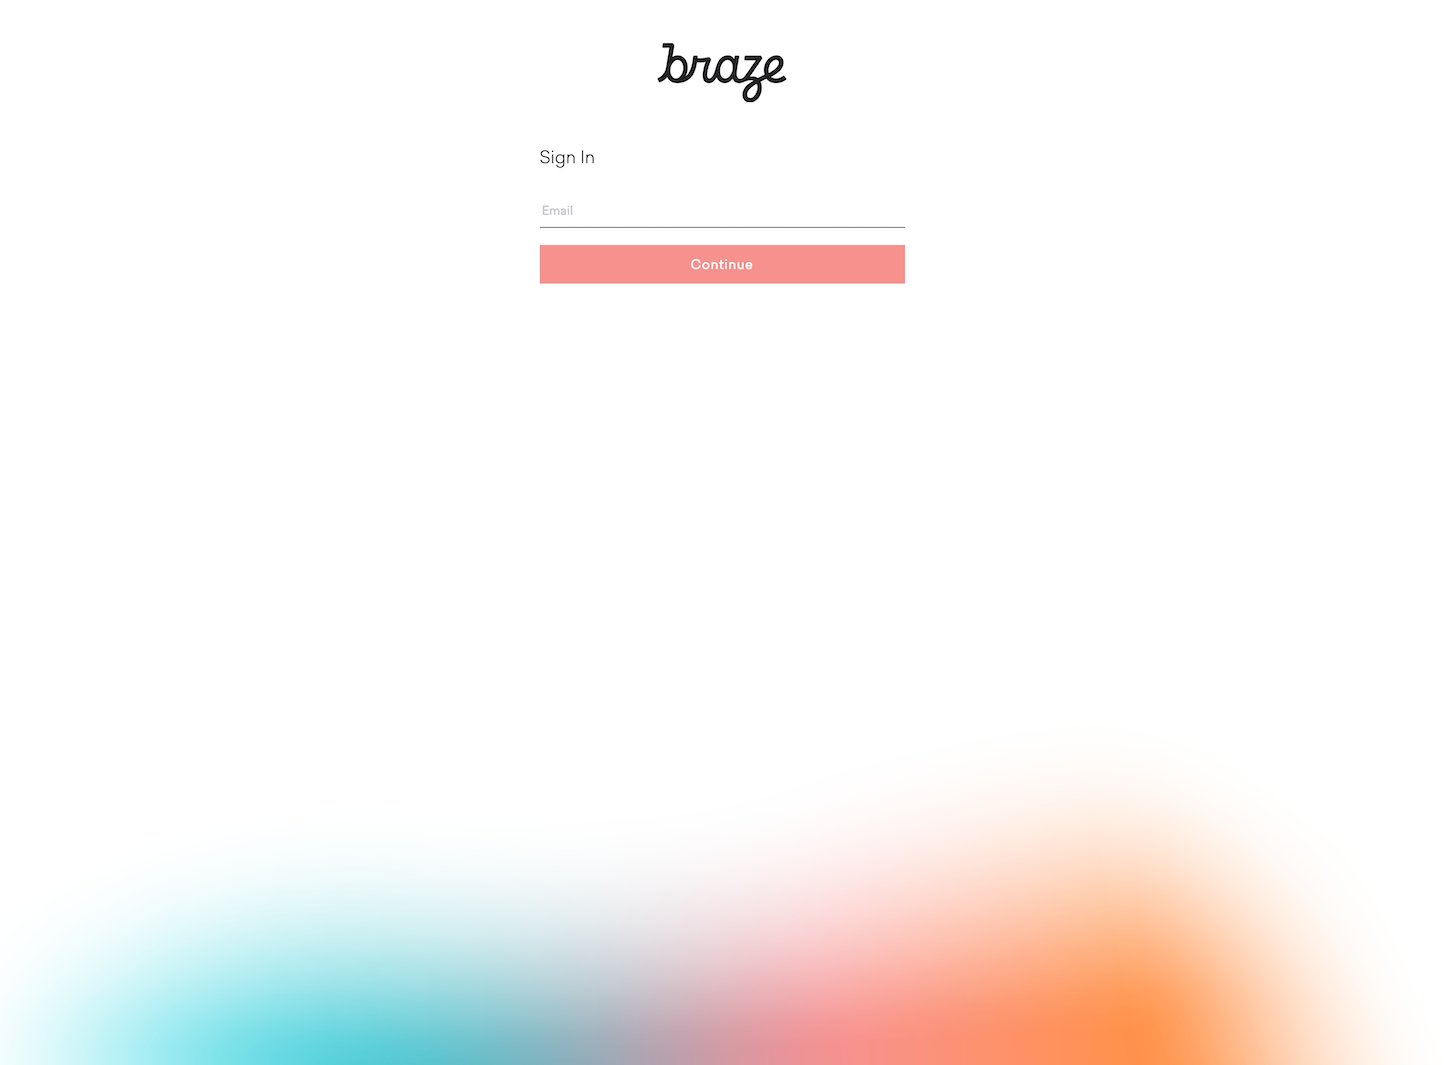 Screenshot of the Sign In page from the Braze website.